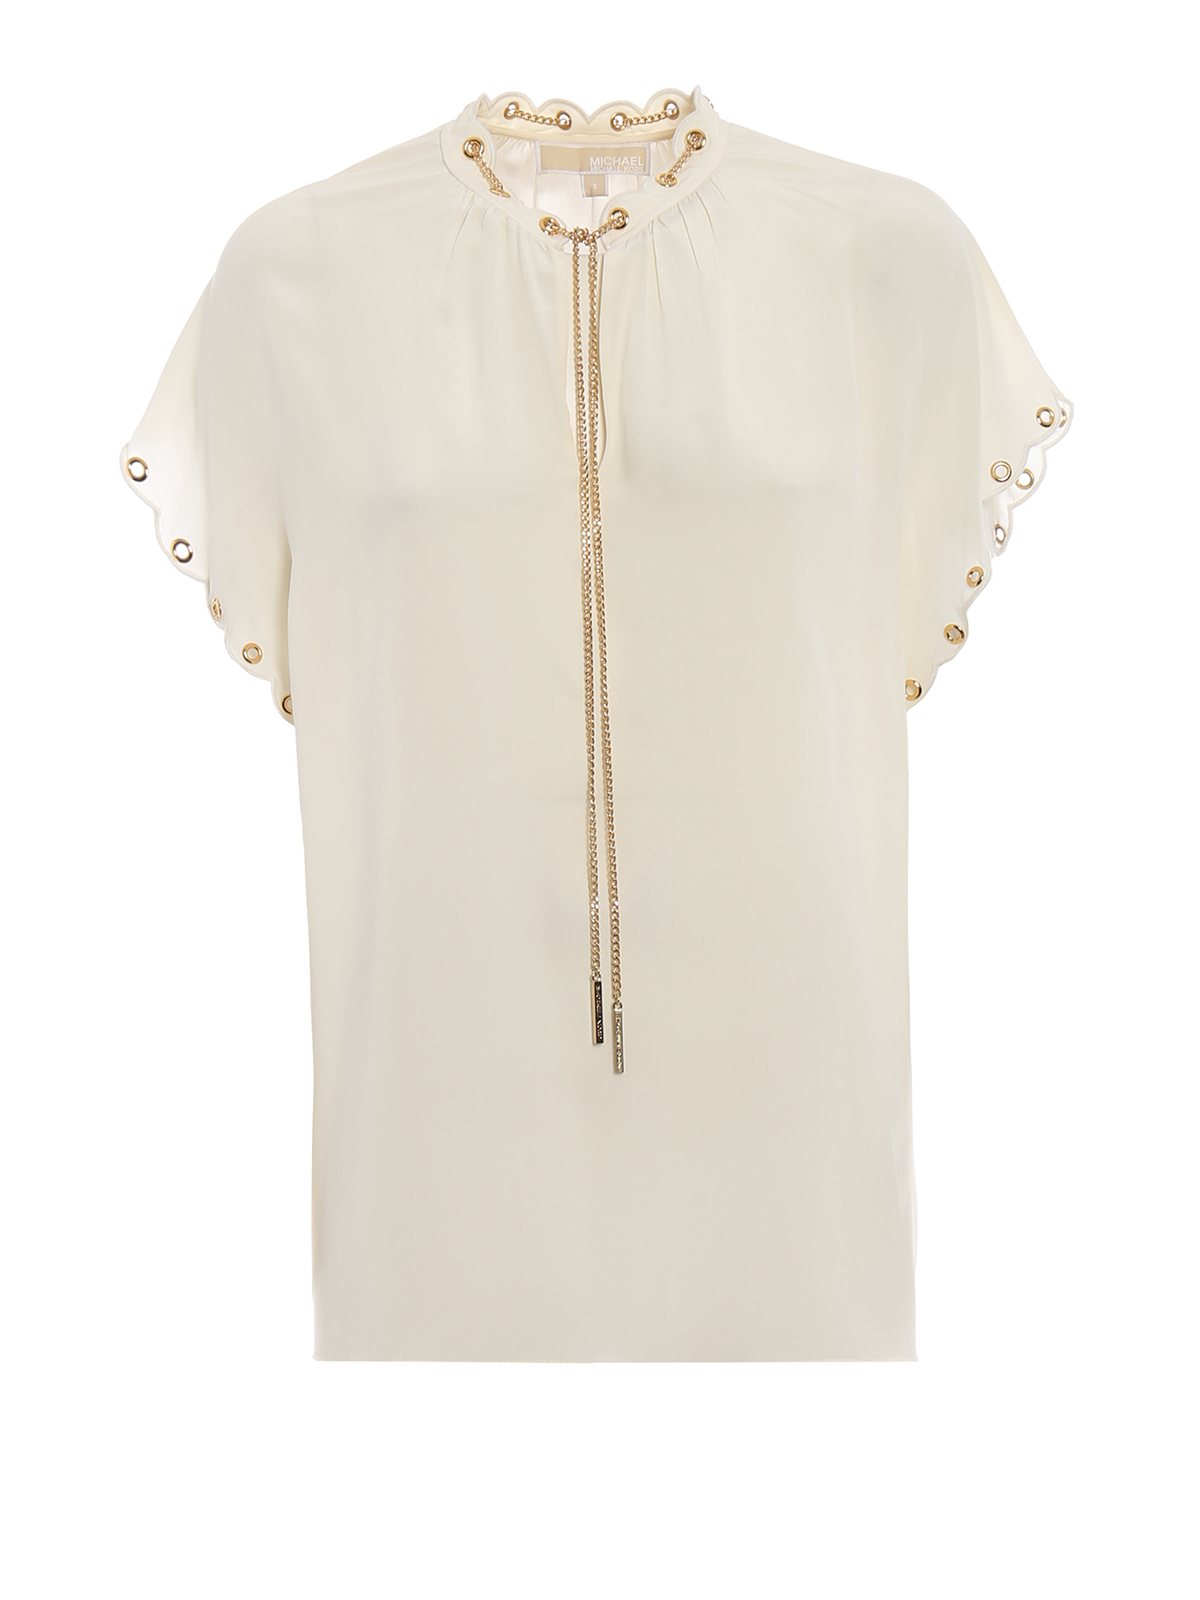 michael kors white blouse with gold chain